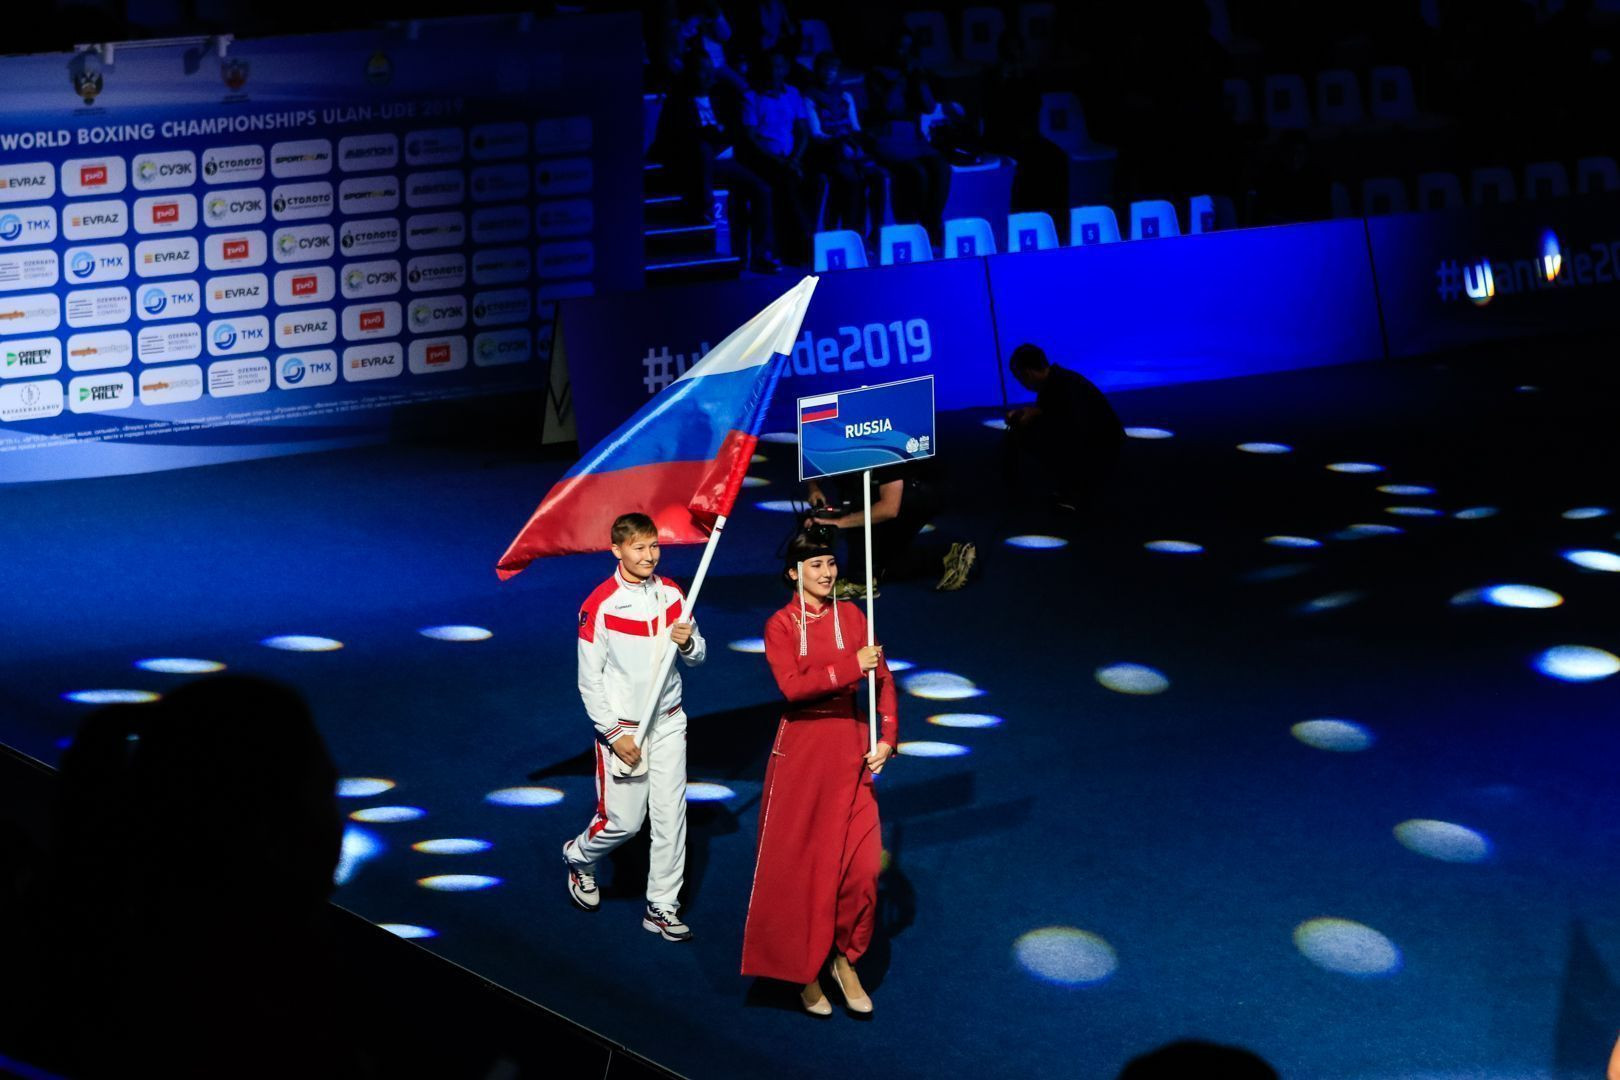 The Russian flag received rapturous applause from the home crowd ©AIBA